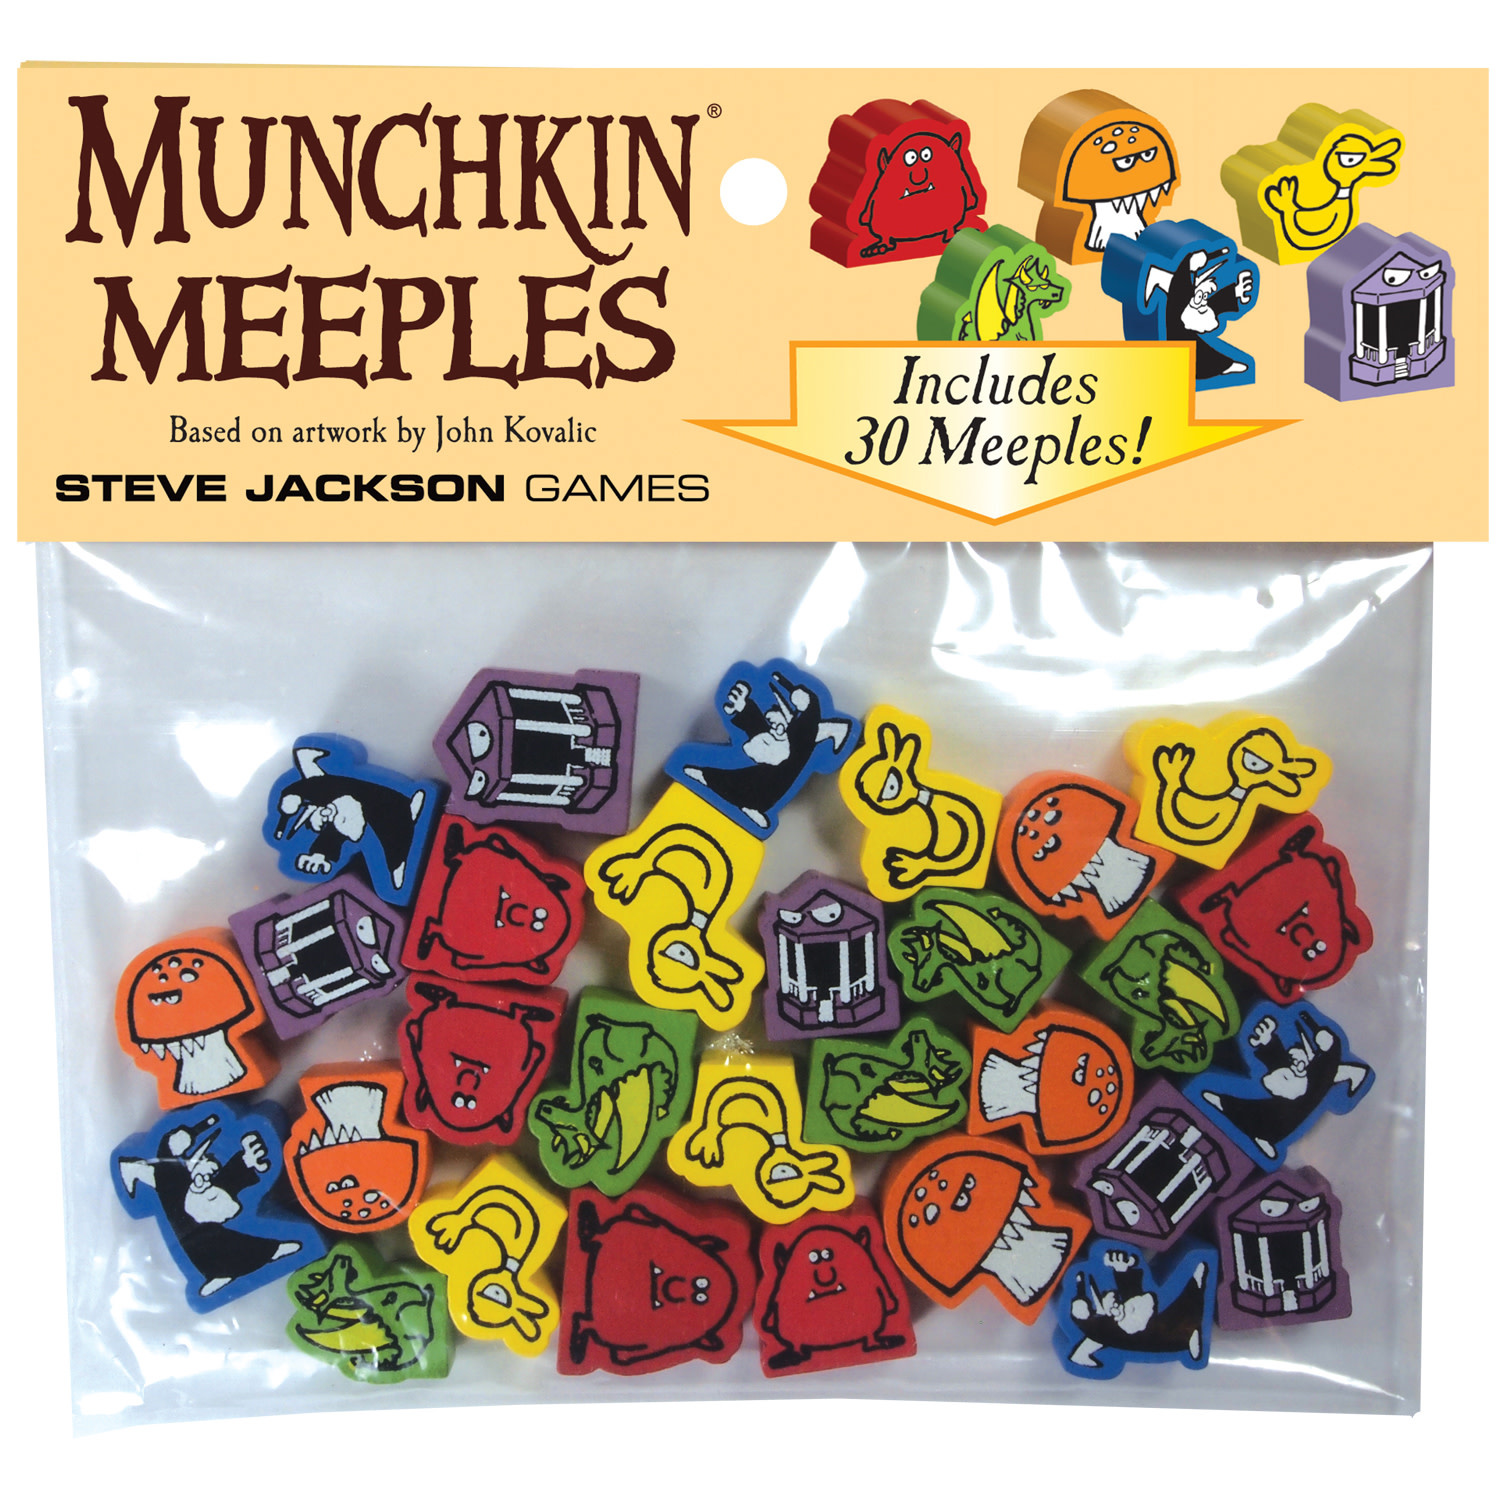 What are meeples and meeple games?